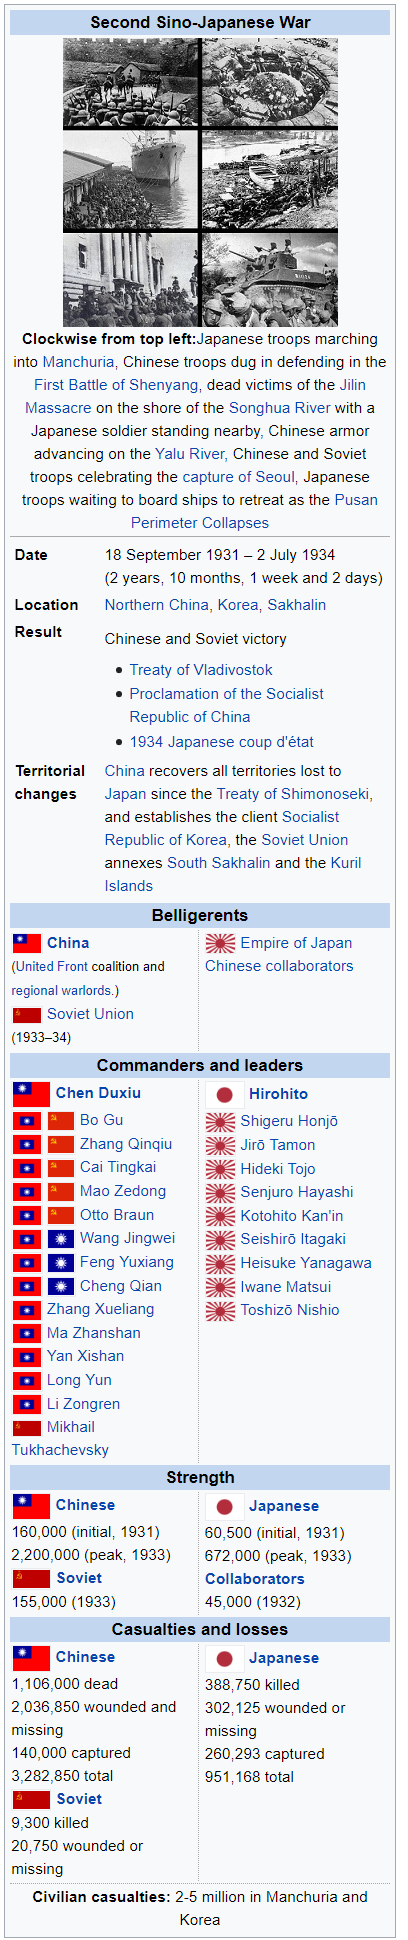 second sino japanese war.png